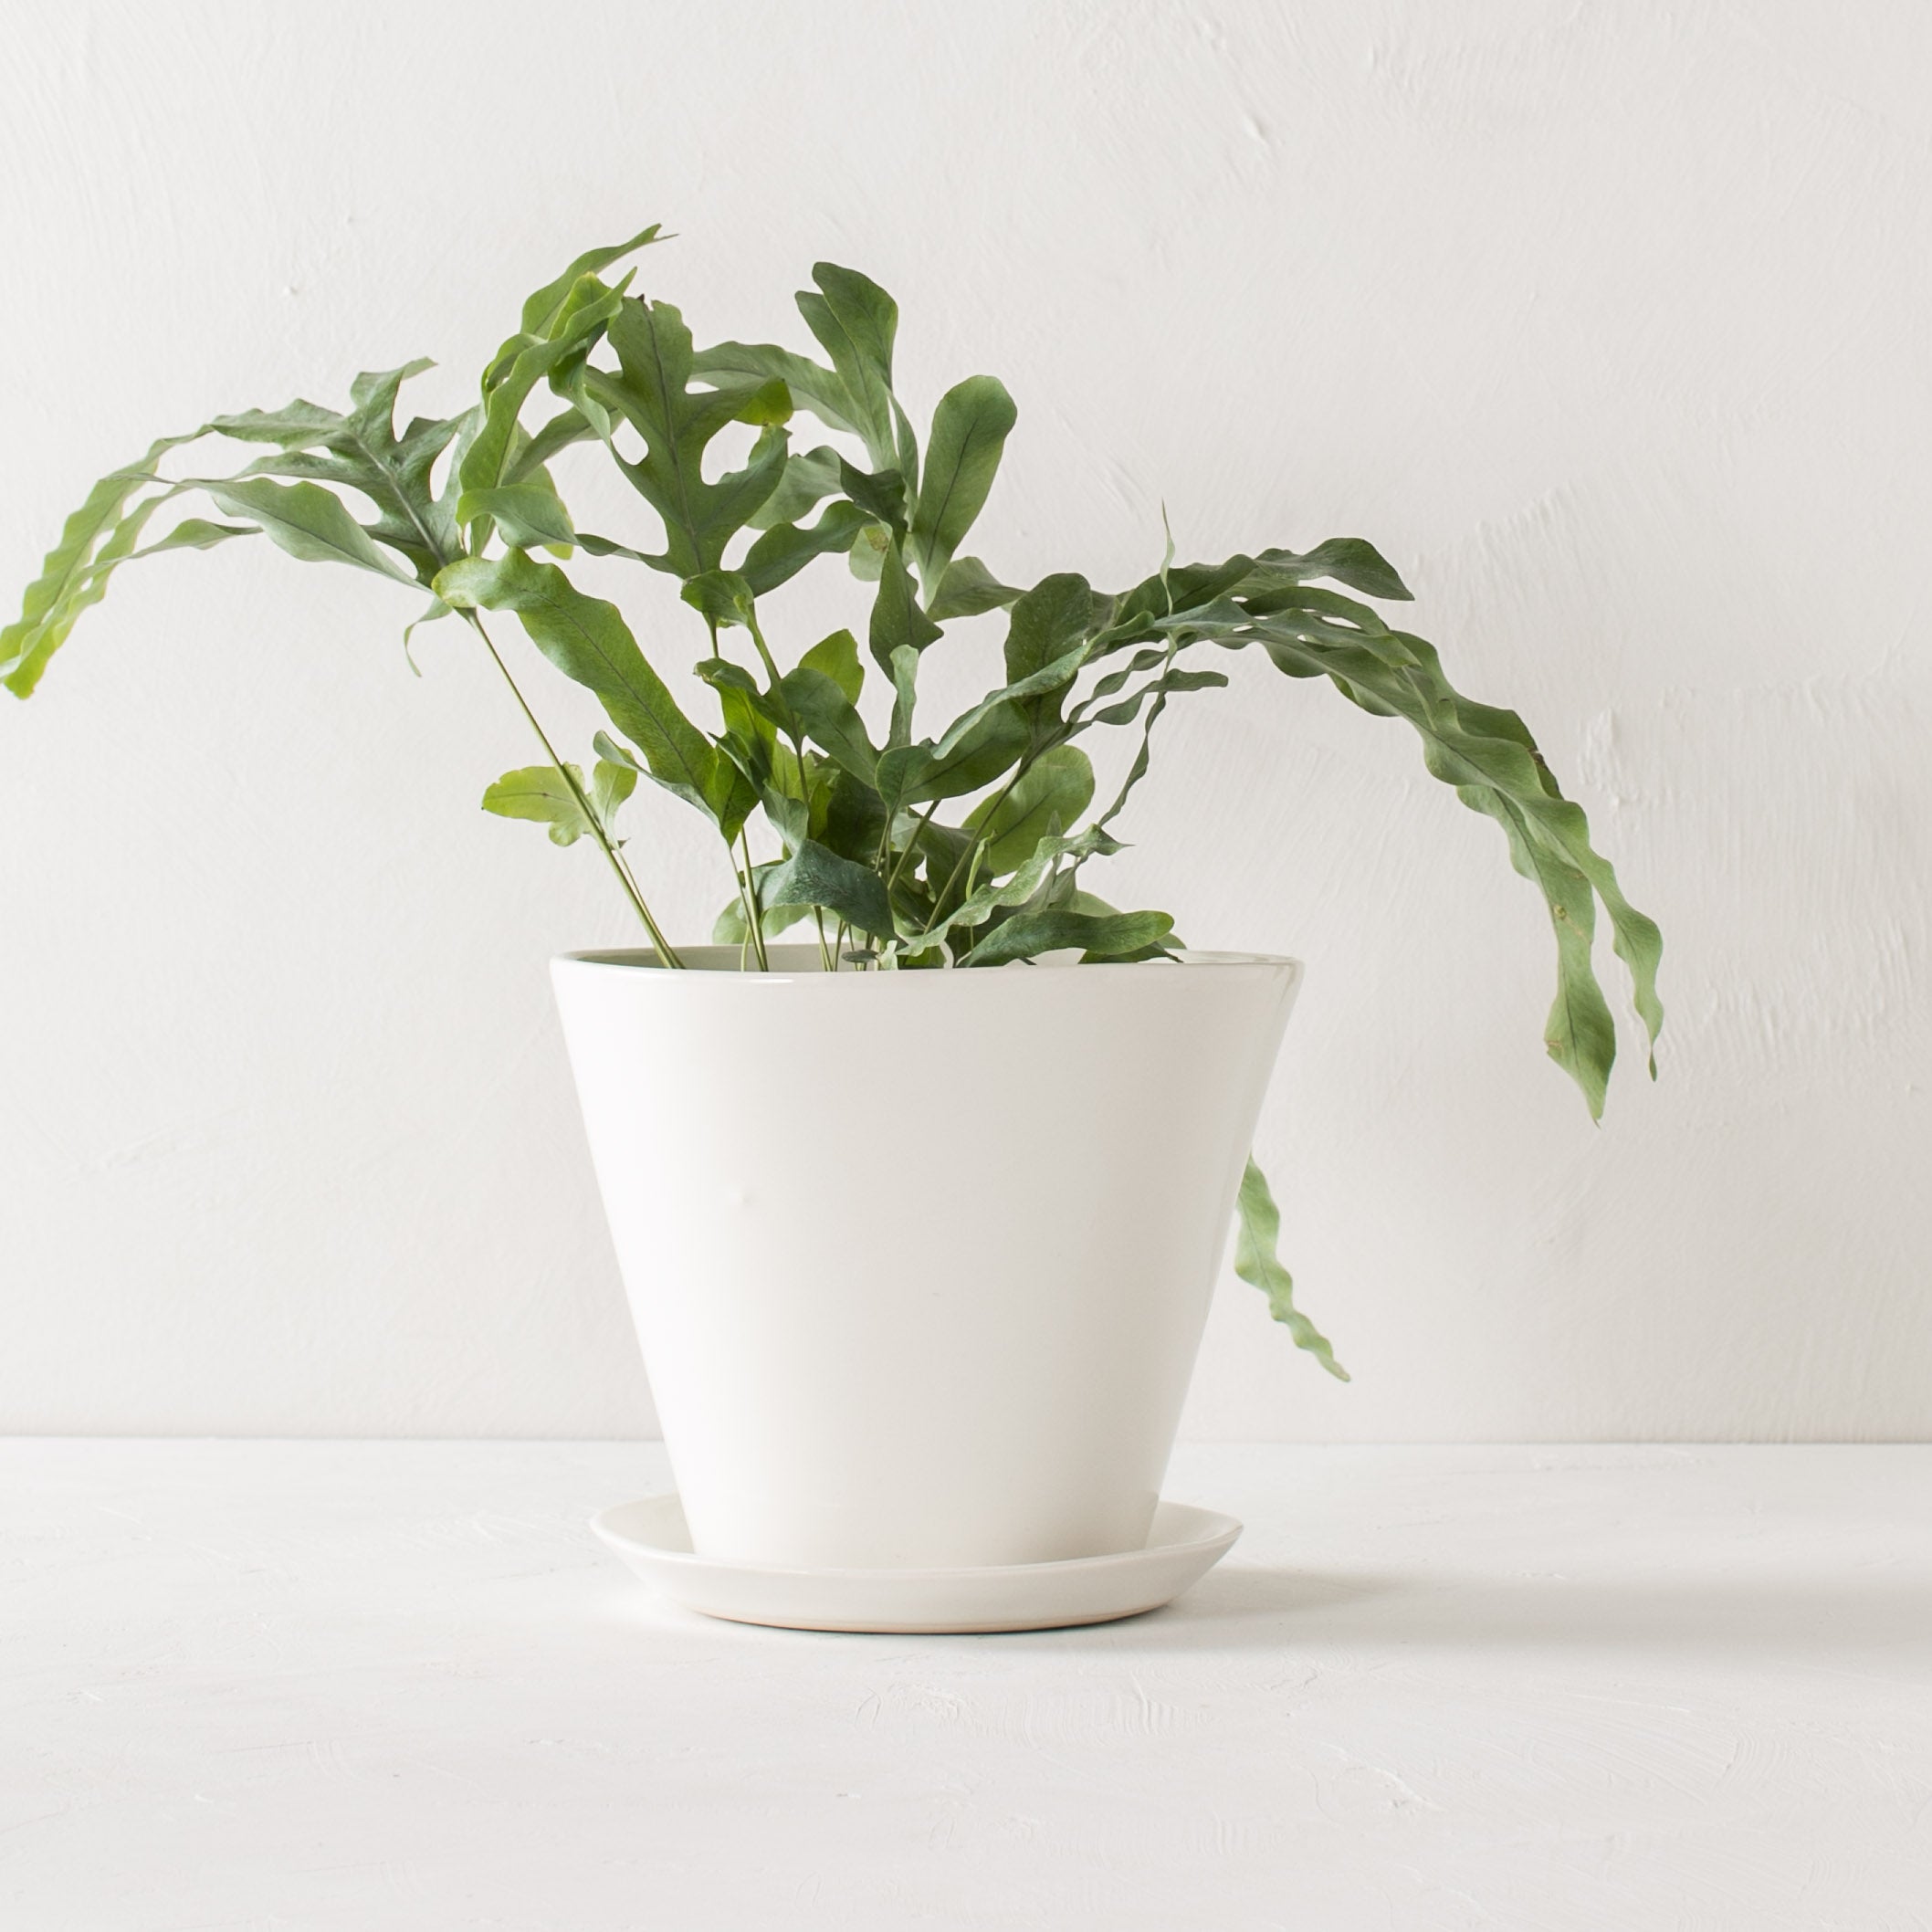 White glazed minimal tapered ceramic planter. Planter includes drainage hole and bottom drainage dish. Planter has a plant inside, background and table top are both white plaster textured. Designed and sold by Convivial Production, Kansas City Ceramics.